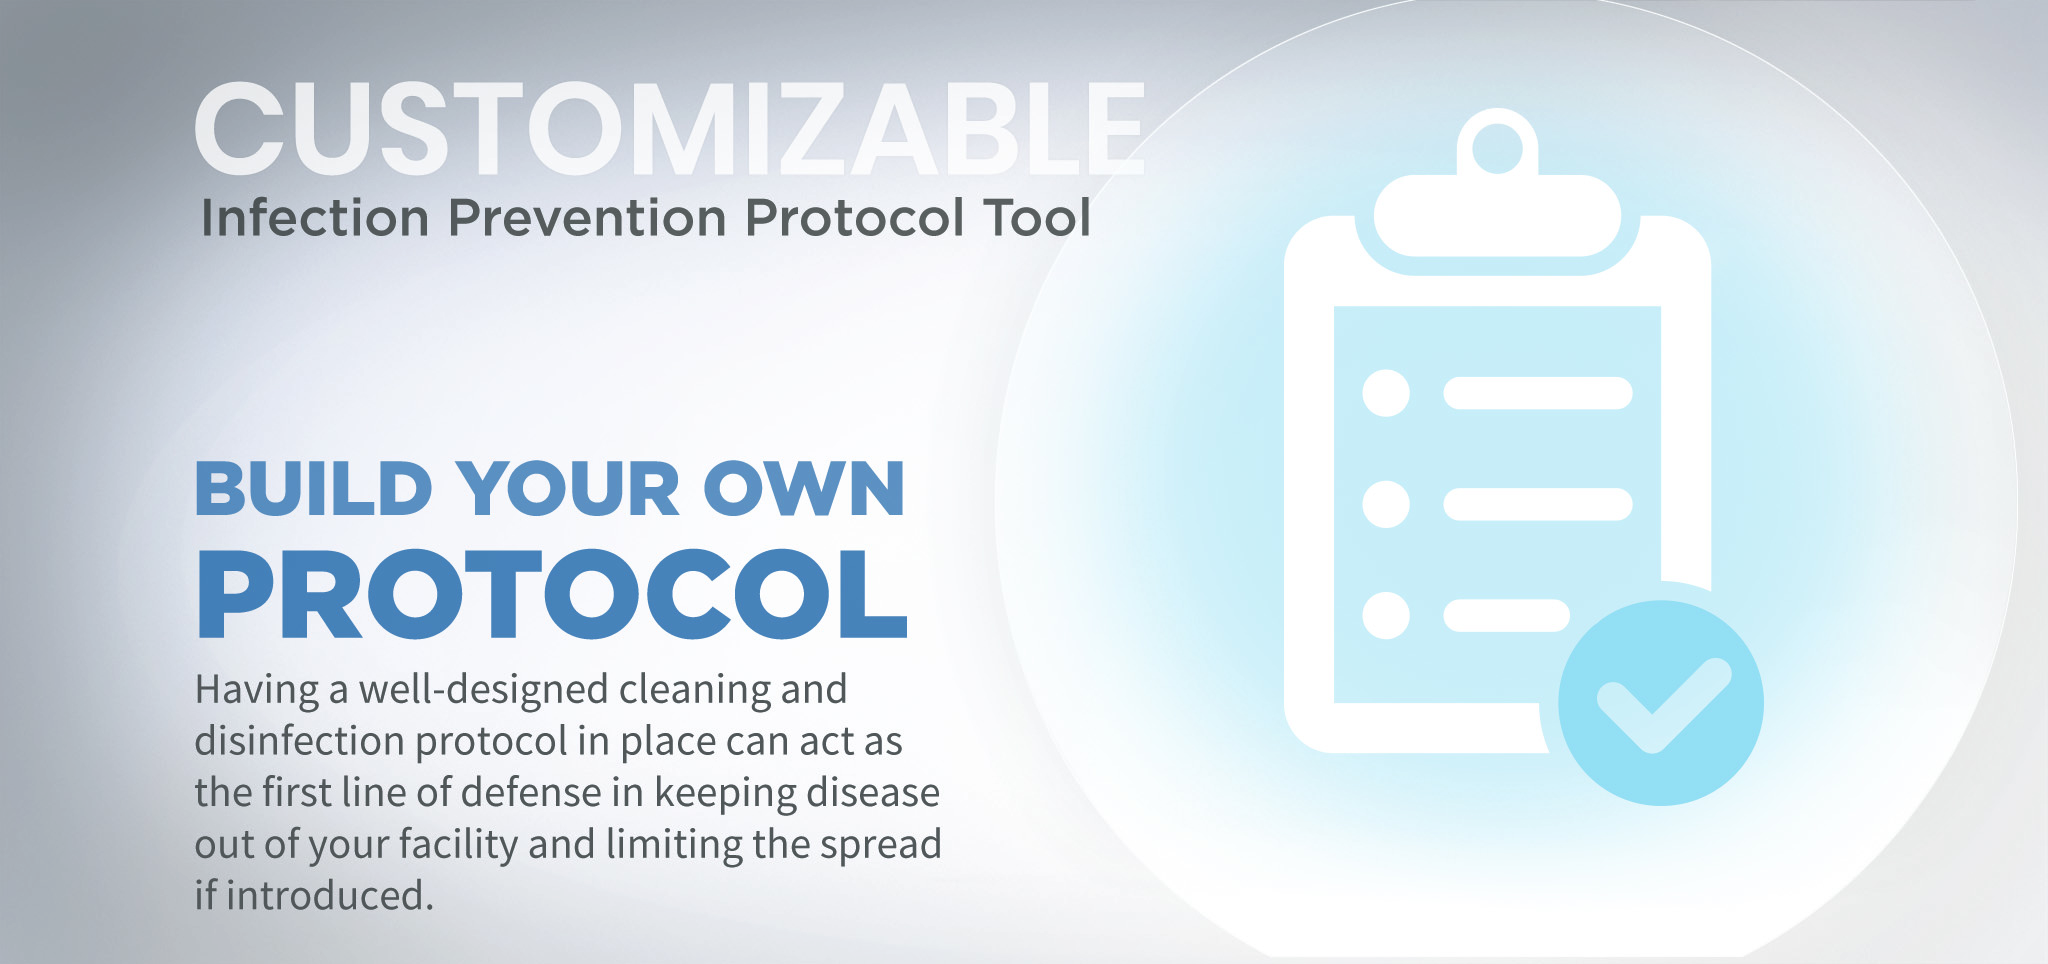 Customizable Infection Prevention Protocol Tool